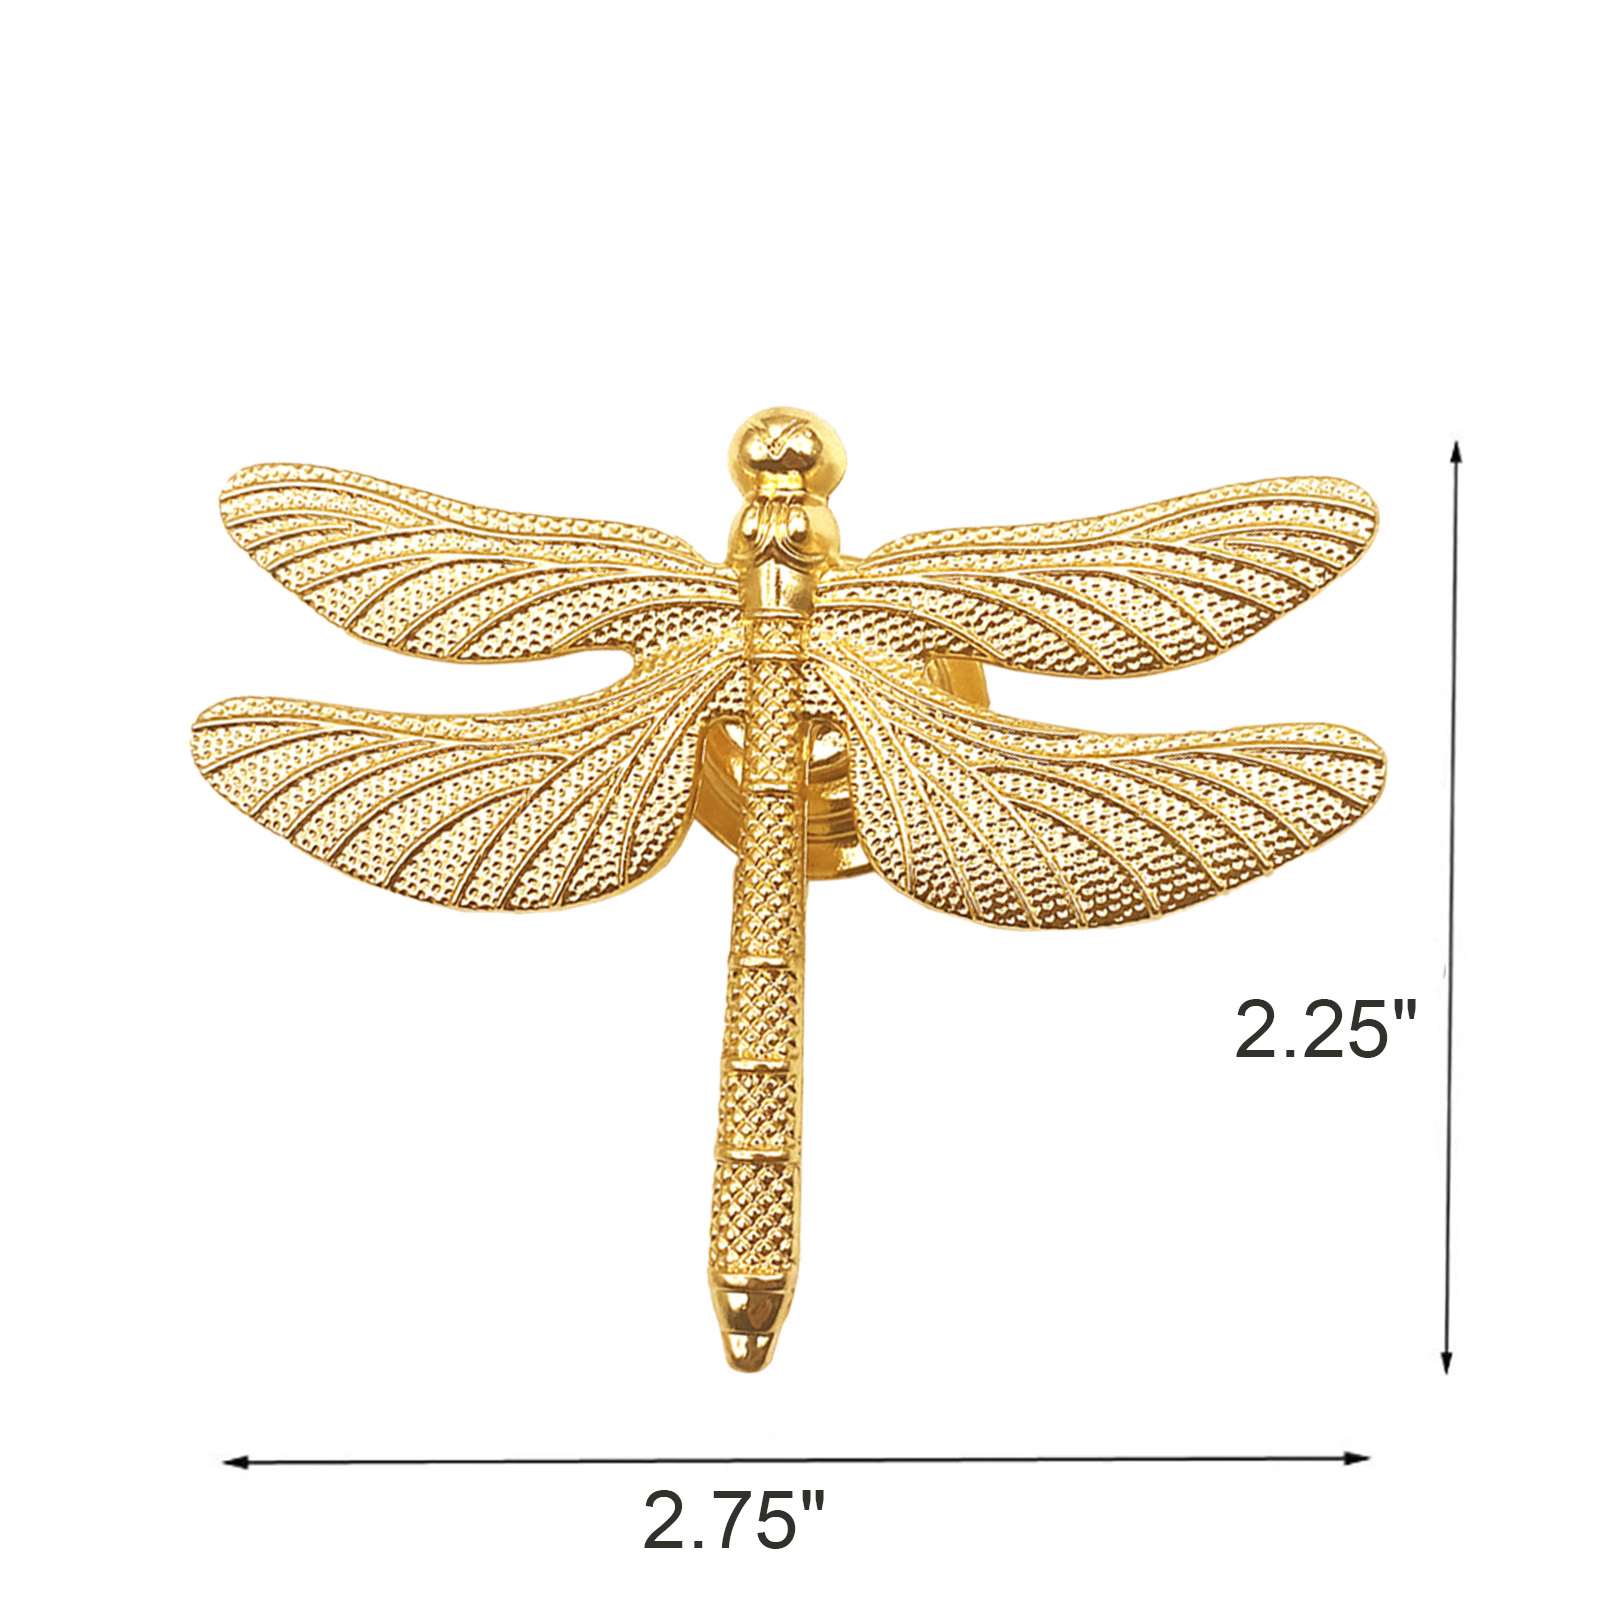 4 pcs Creative Dragonfly Knobs Drawer/Cabinet Pull Handles Alloy Cabinet Knobs Gold Drawer Cupboard Wardrobe Dresser Pulls Knobs Hardware - image 2 of 6